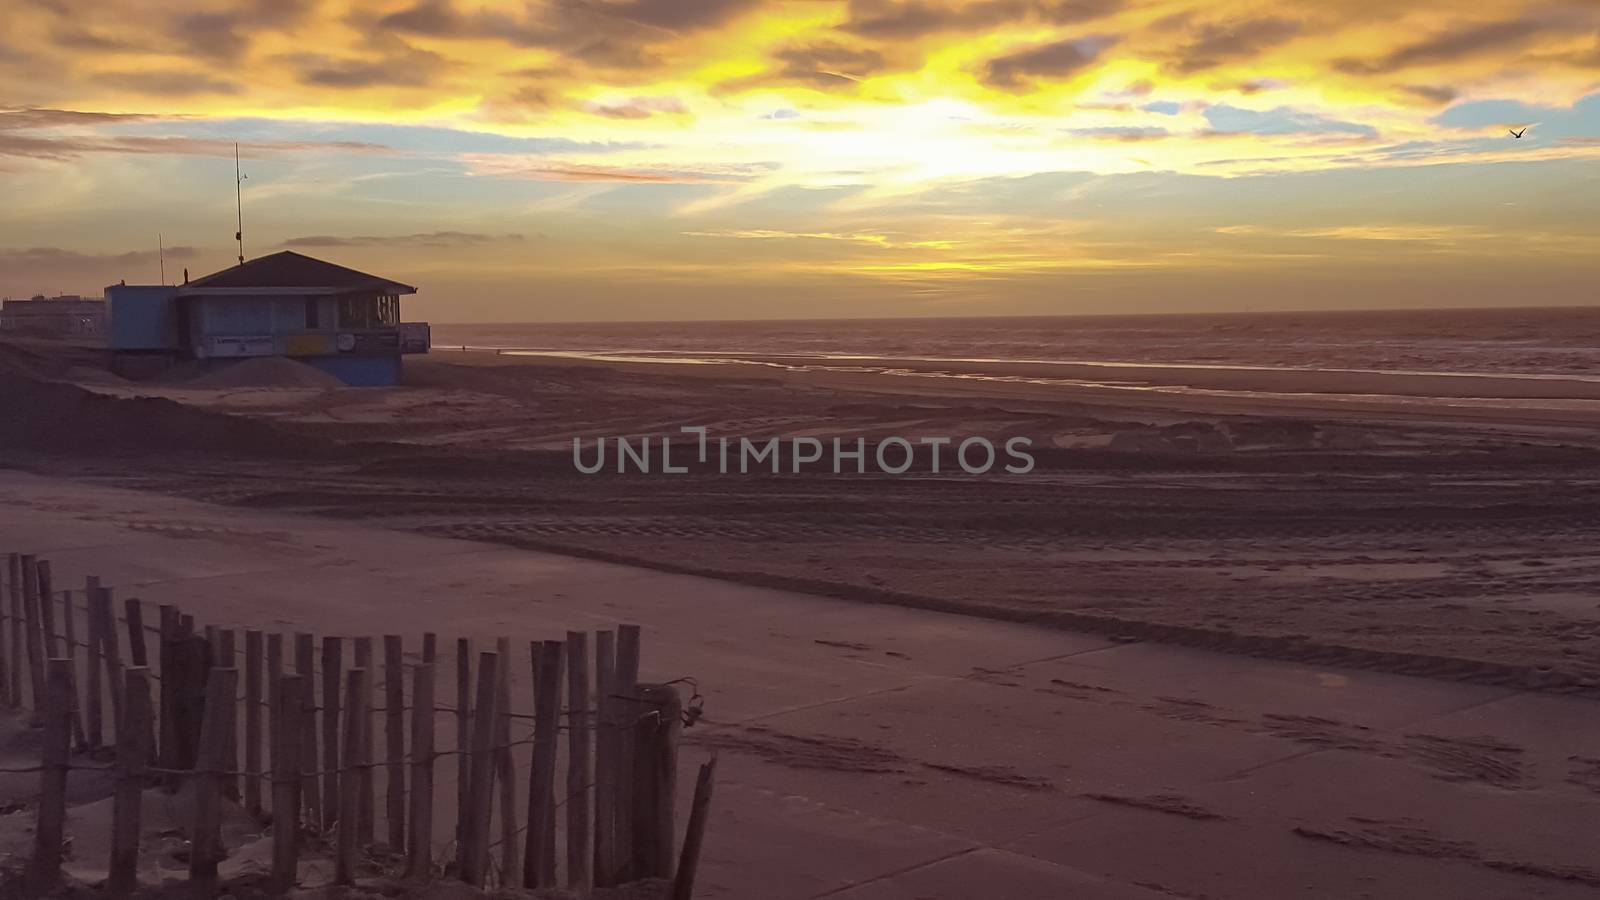 Sunset in Noordwijk The Netherlands Along the Beach with yellow Sky by TheDutchcowboy